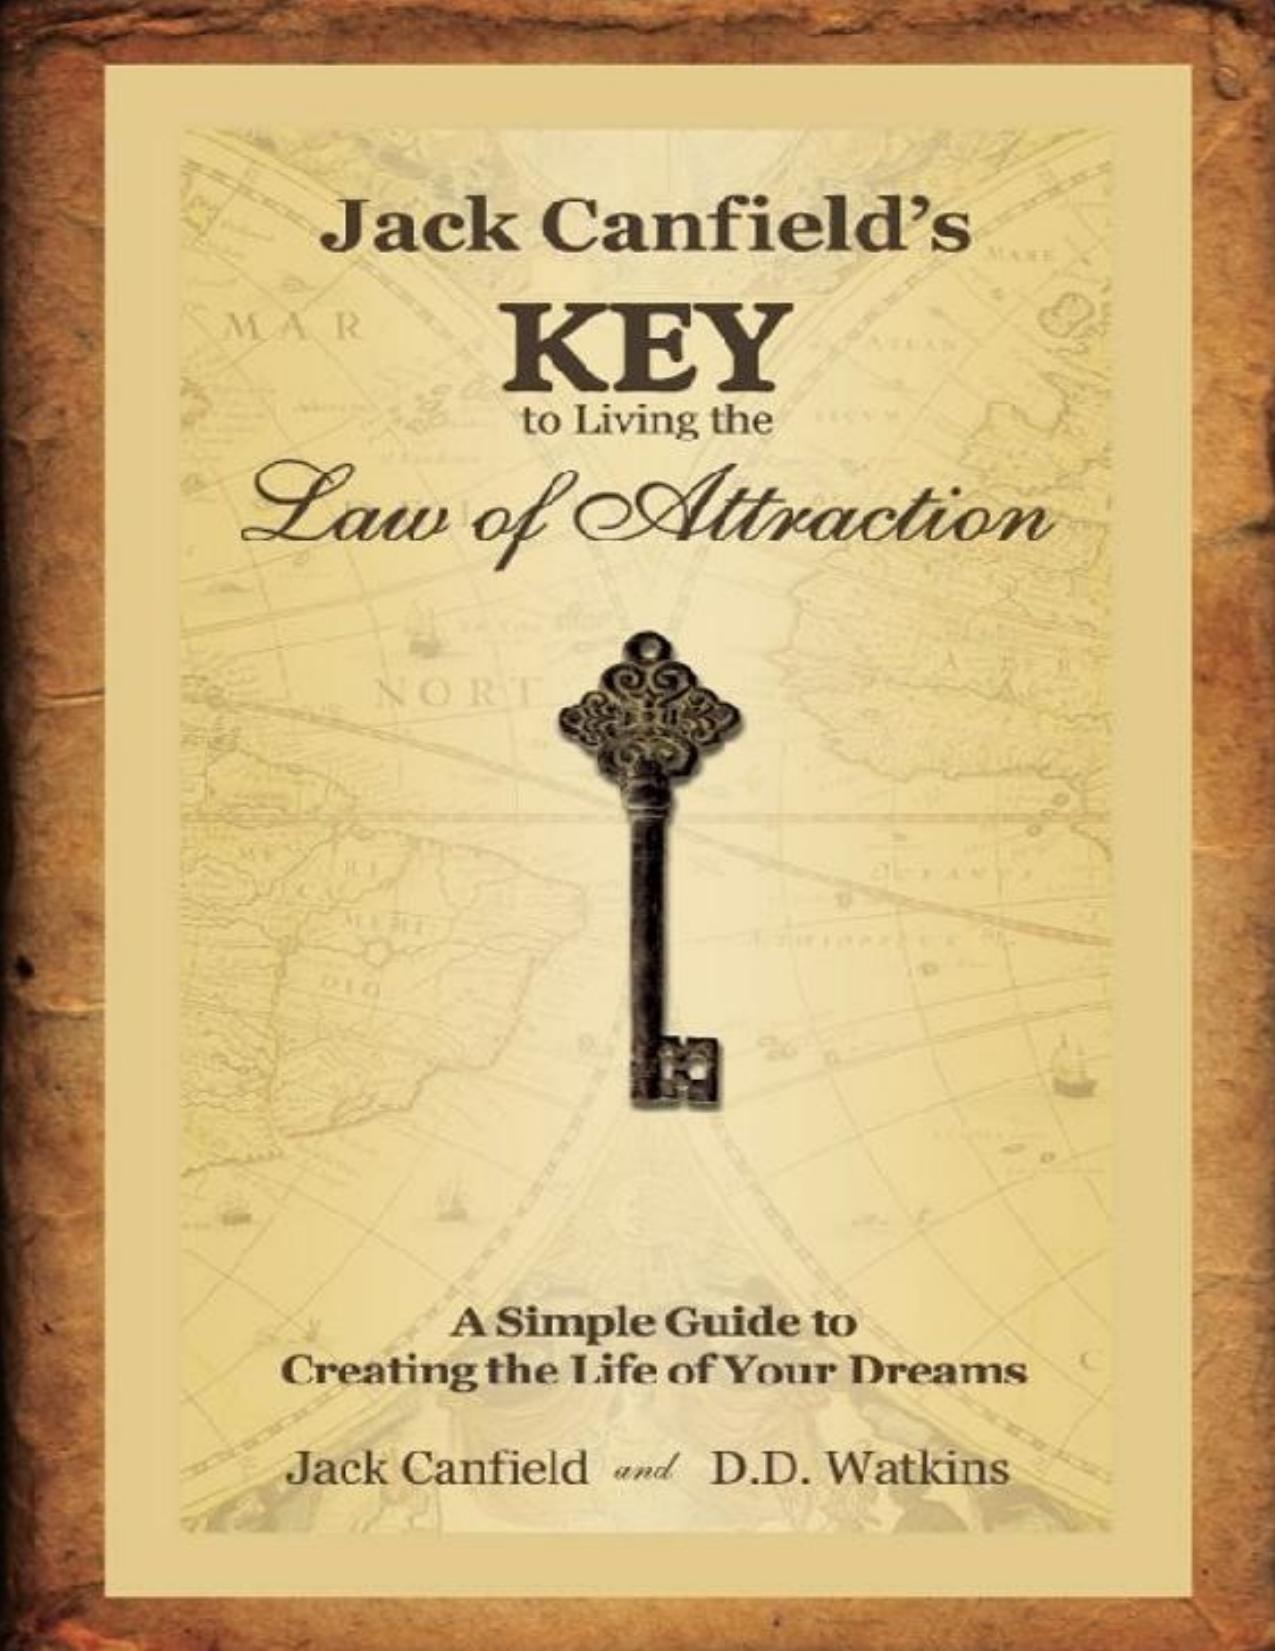 Jack Canfield's Key to Living the Law of Attraction: A Simple Guide to Creating the Life of Your Dreams by Jack Canfield & D.D. Watkins